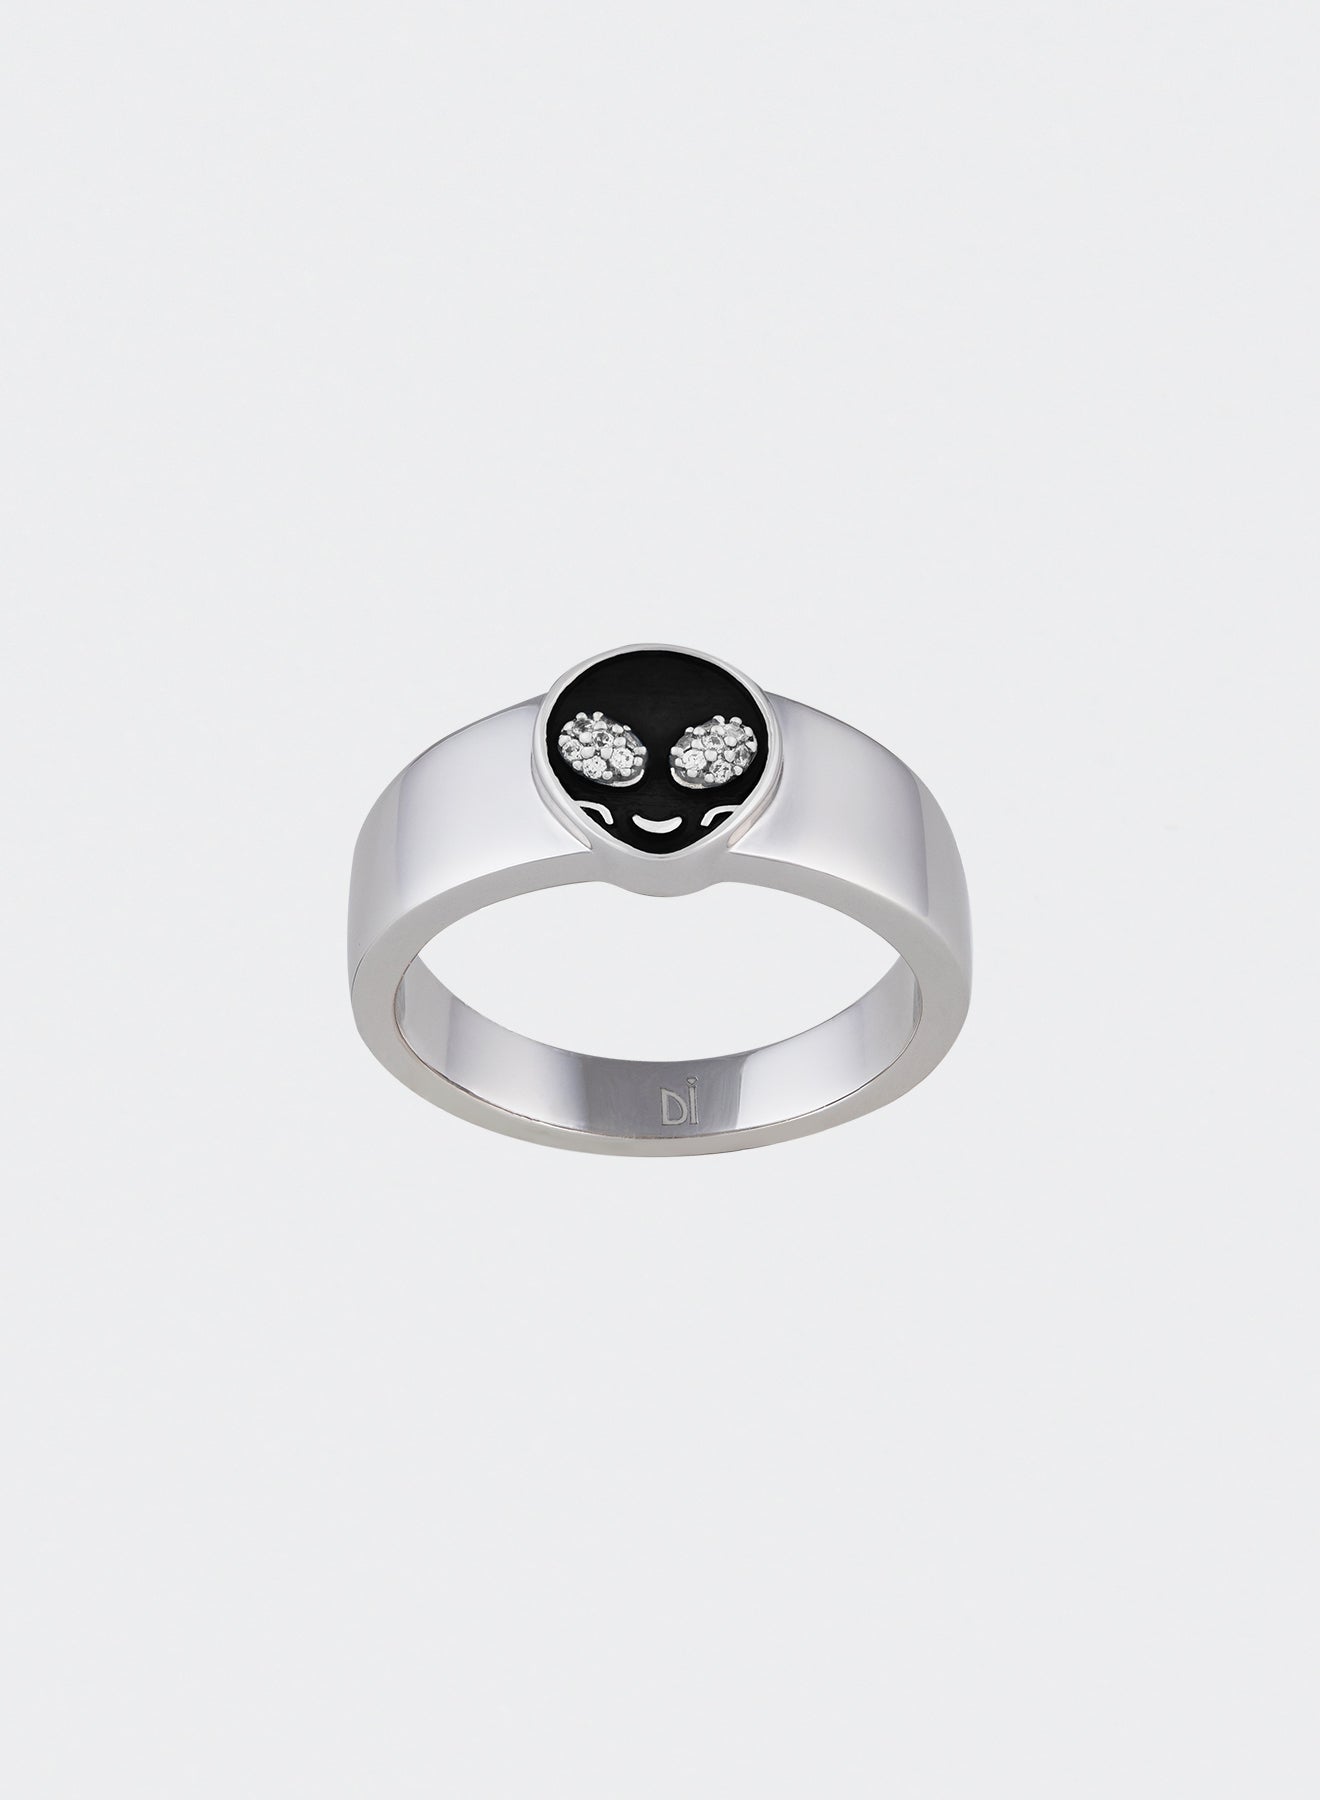 white ring with 18k gold plated and black alien face for man end woman